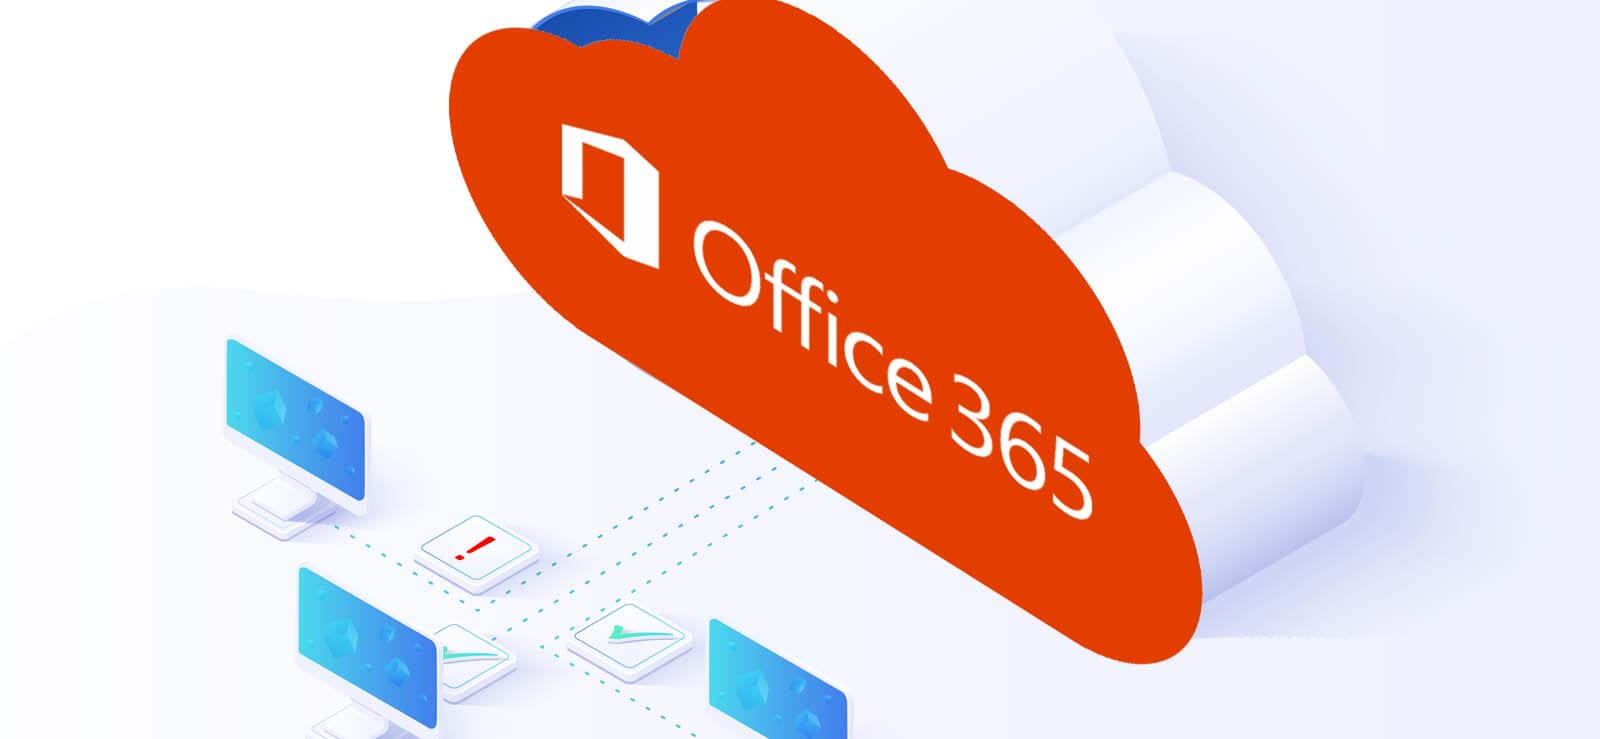 Office 365 Migration Failed; The Recipient is Not a Mailbox